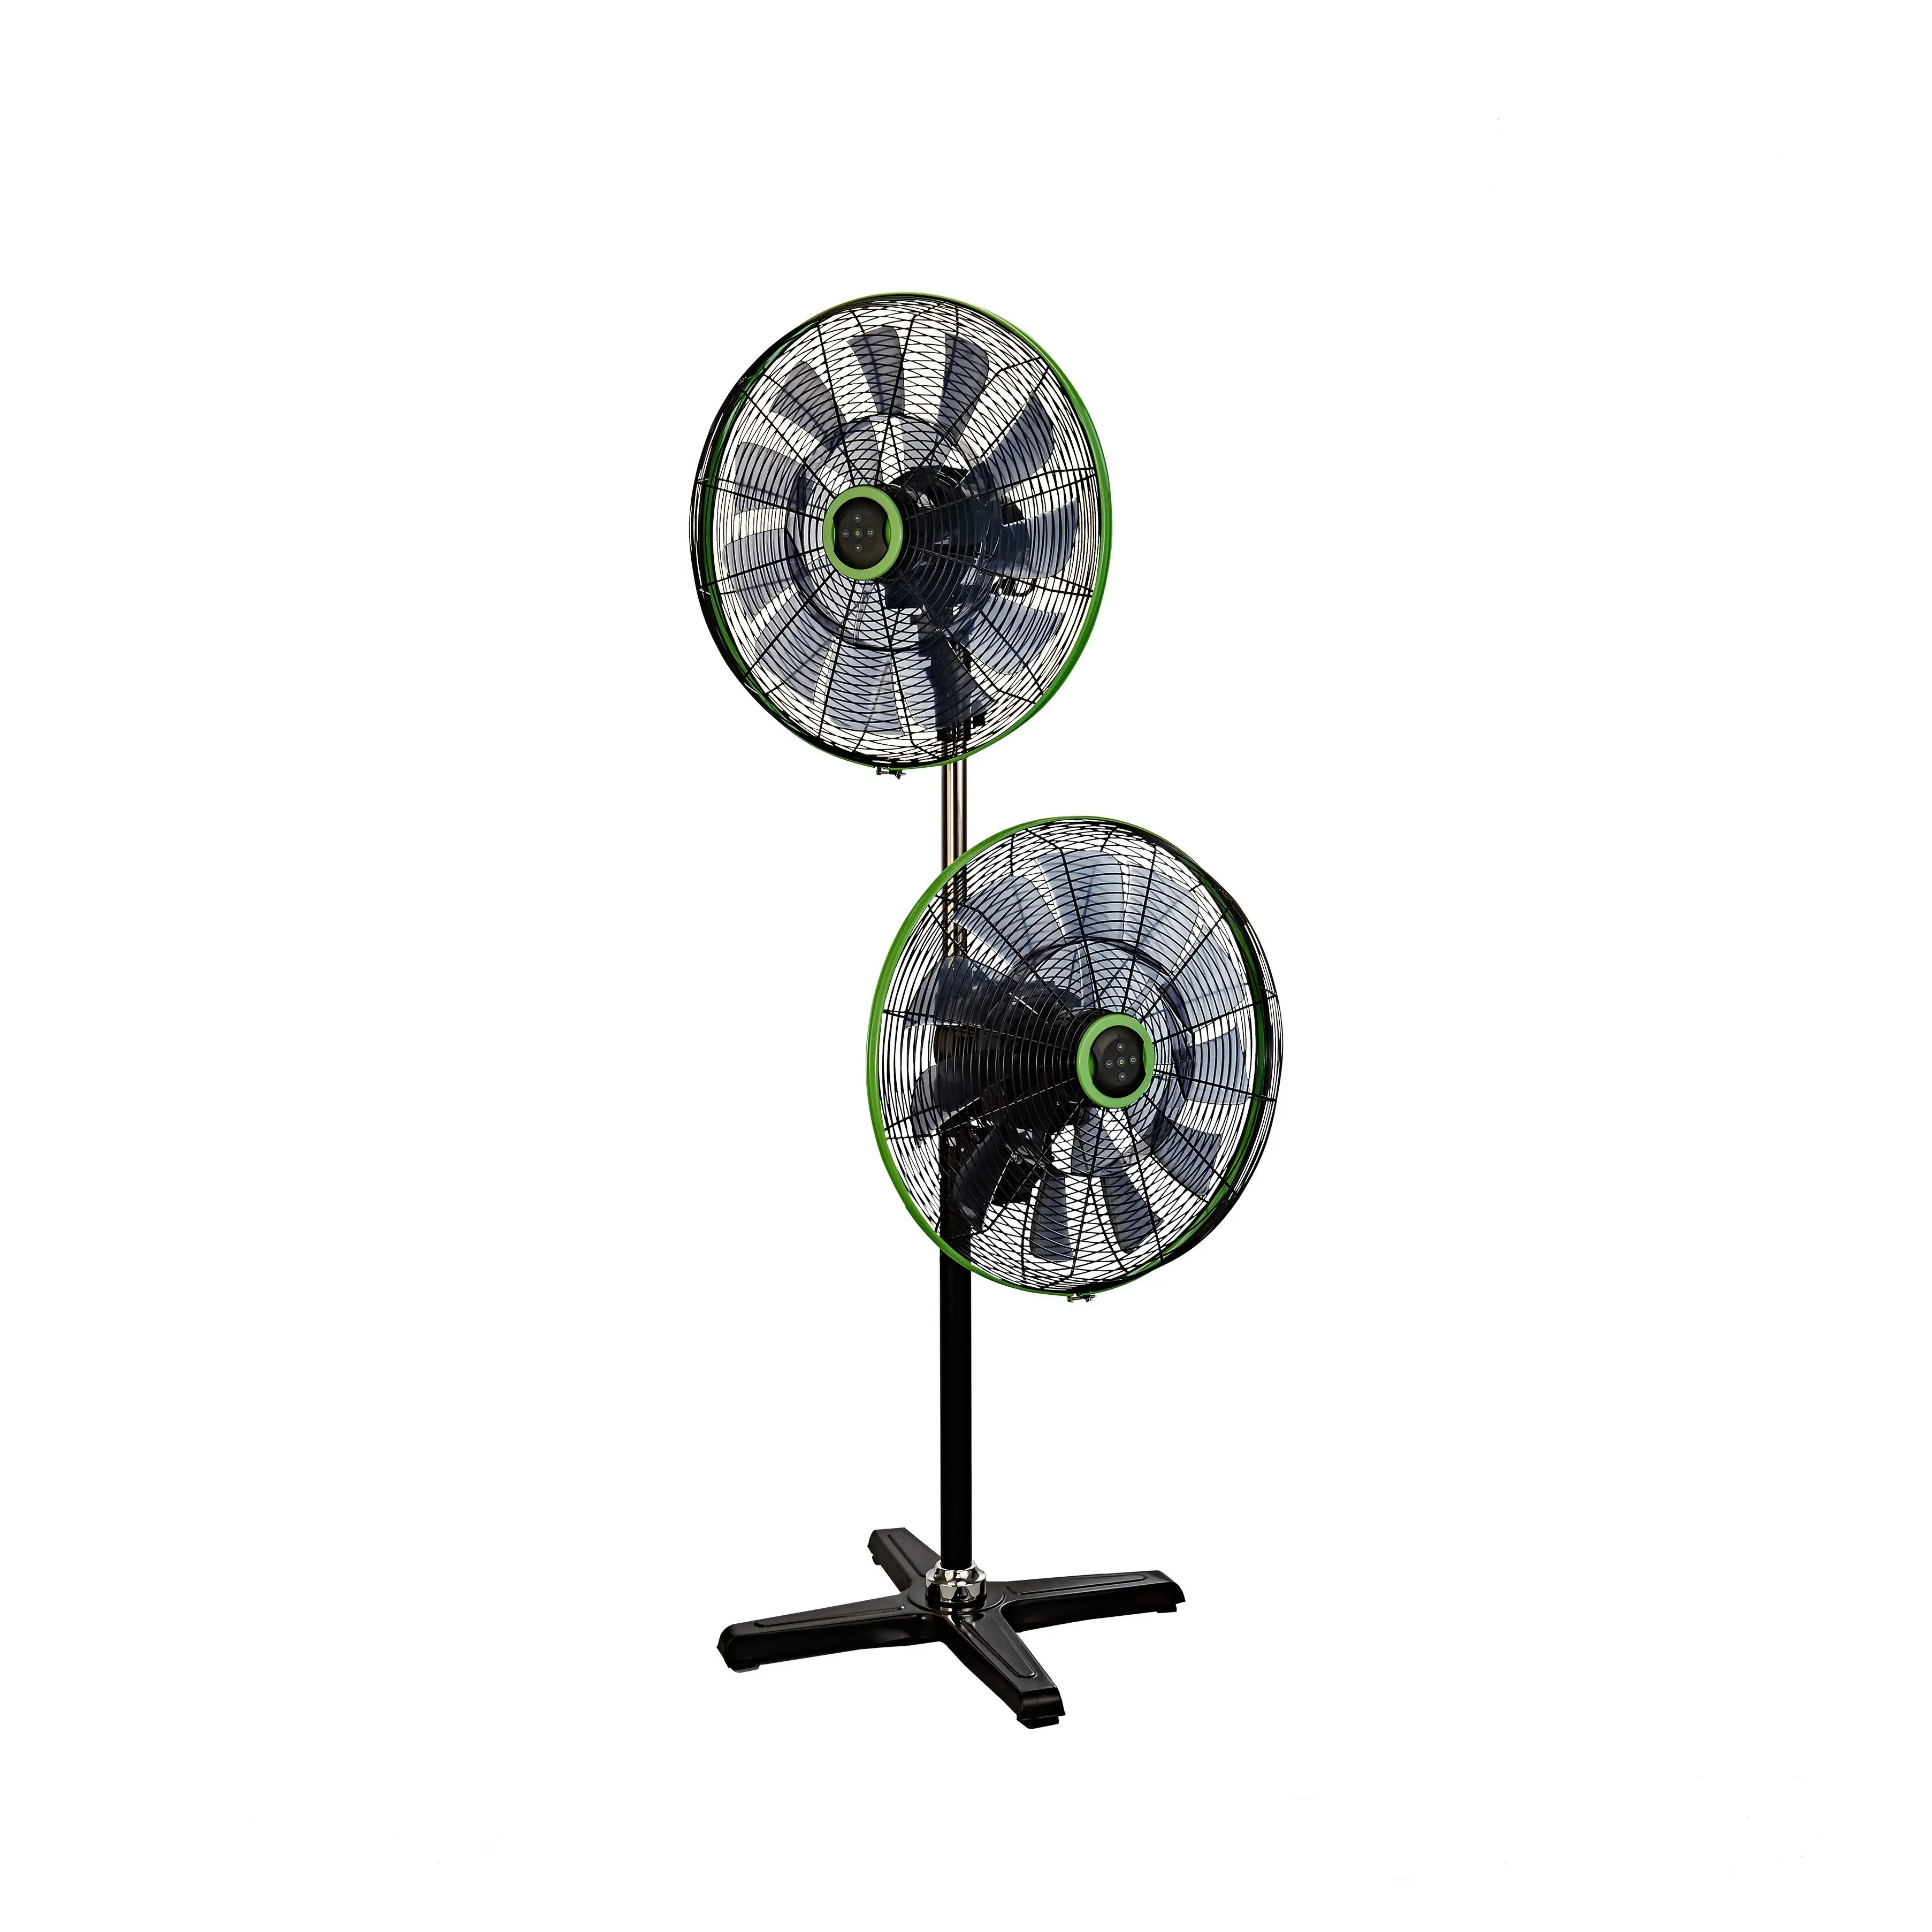 Premium Quality Double-Head DC Motor Design 18 Inches 18 Patent Blades Stand Fan Electric Fan